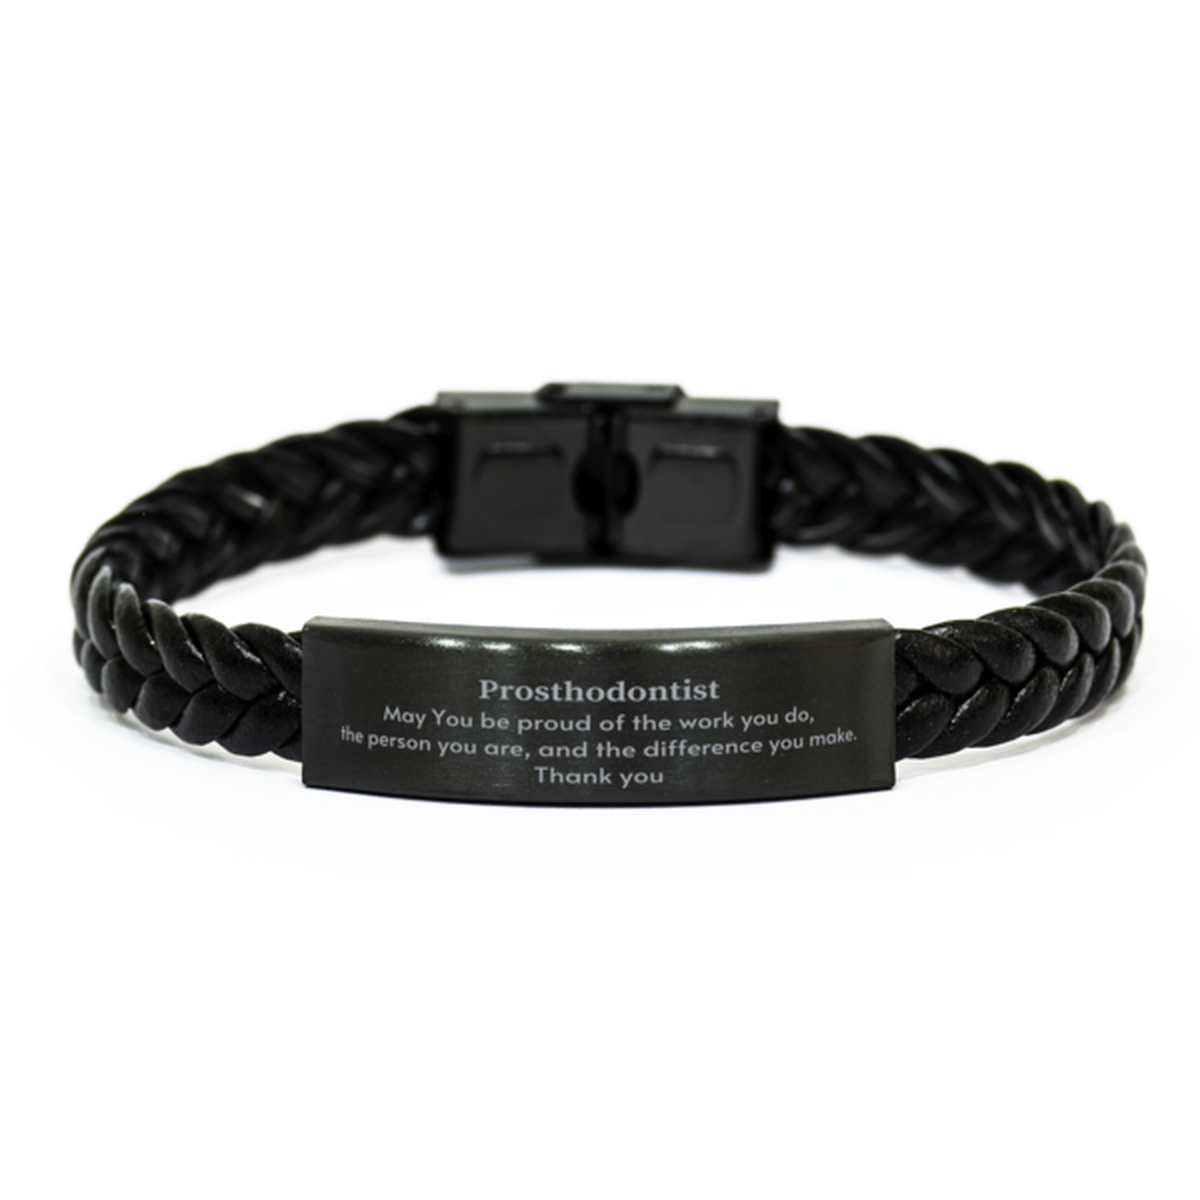 Heartwarming Braided Leather Bracelet Retirement Coworkers Gifts for Prosthodontist, Prosthodontist May You be proud of the work you do, the person you are Gifts for Boss Men Women Friends